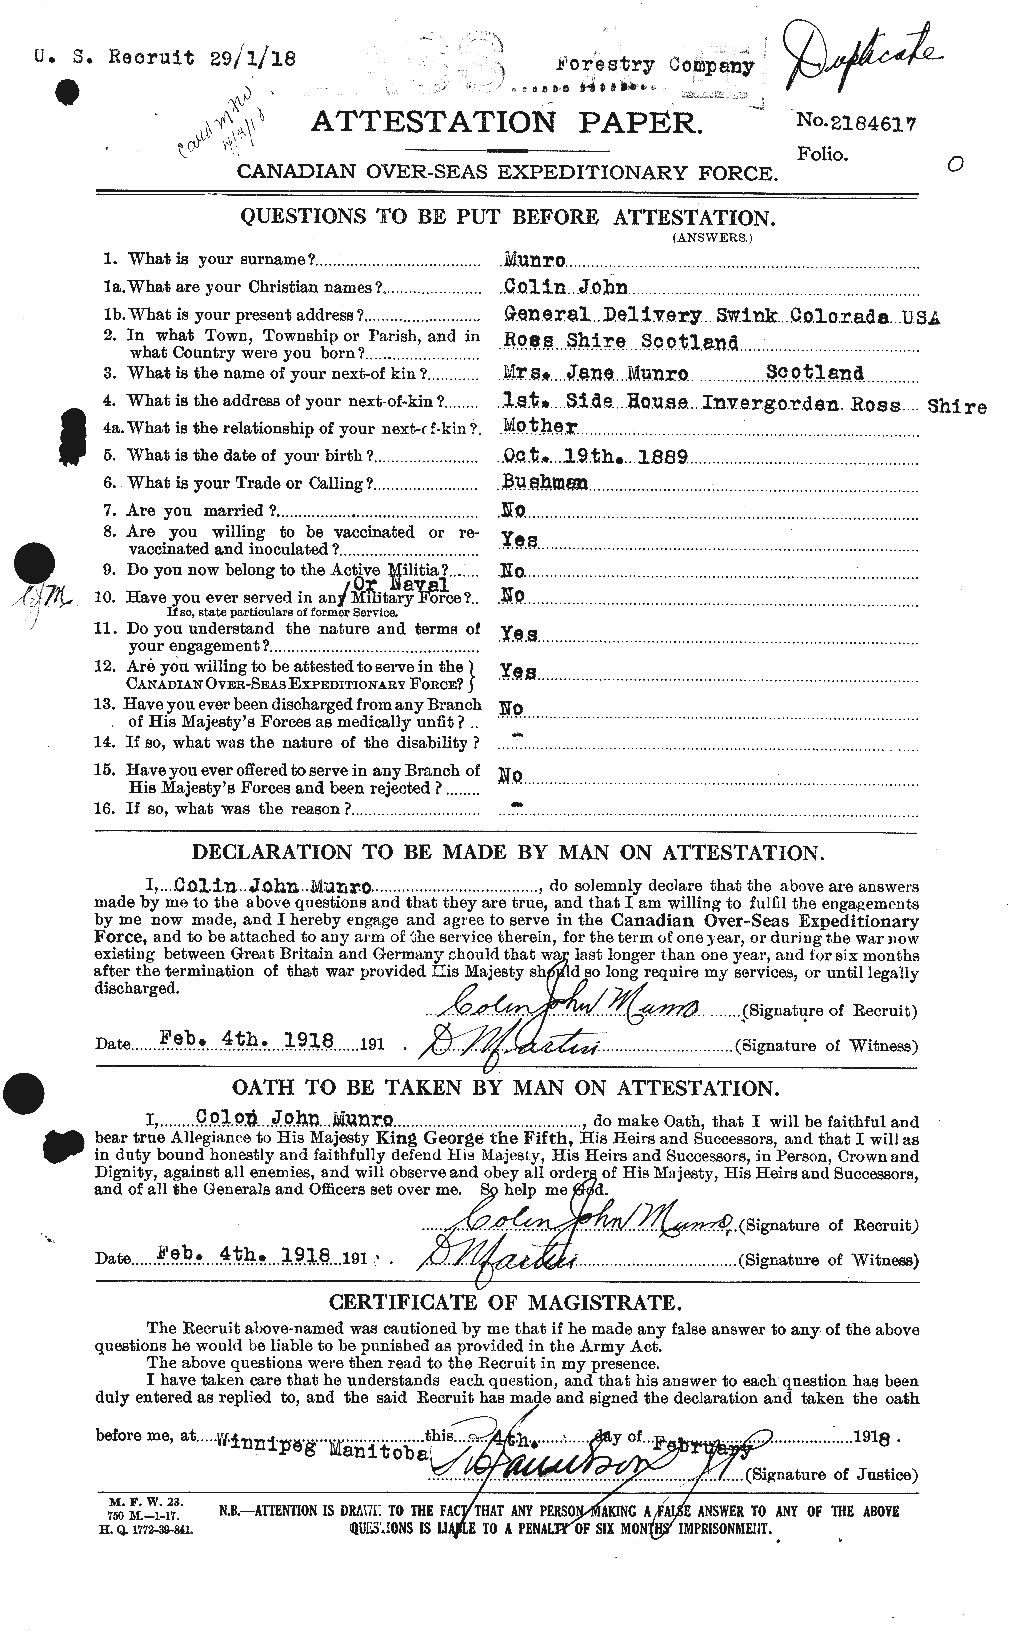 Personnel Records of the First World War - CEF 513776a